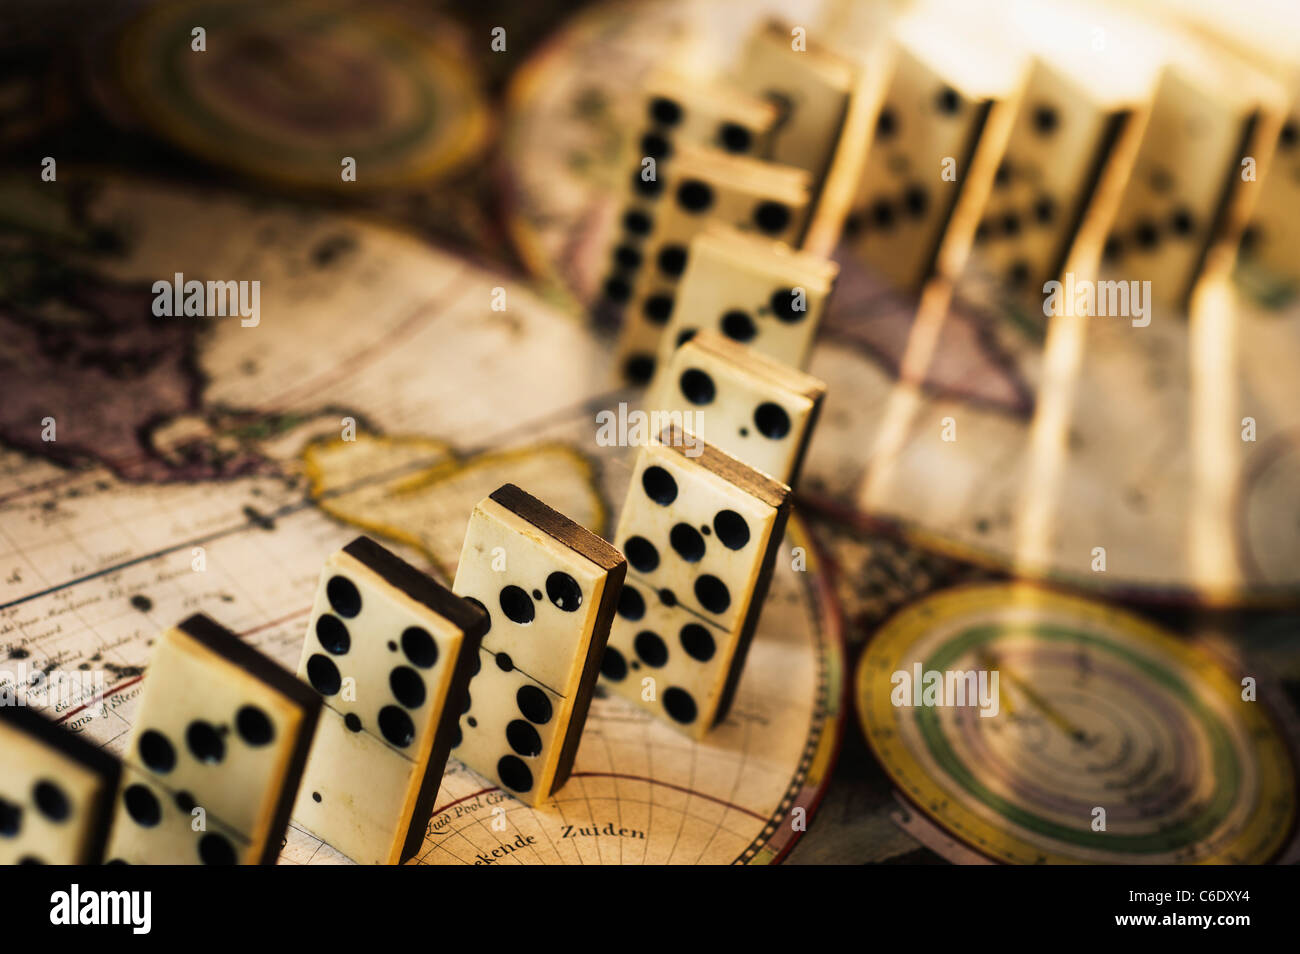 Row of dominoes on old world map Stock Photo